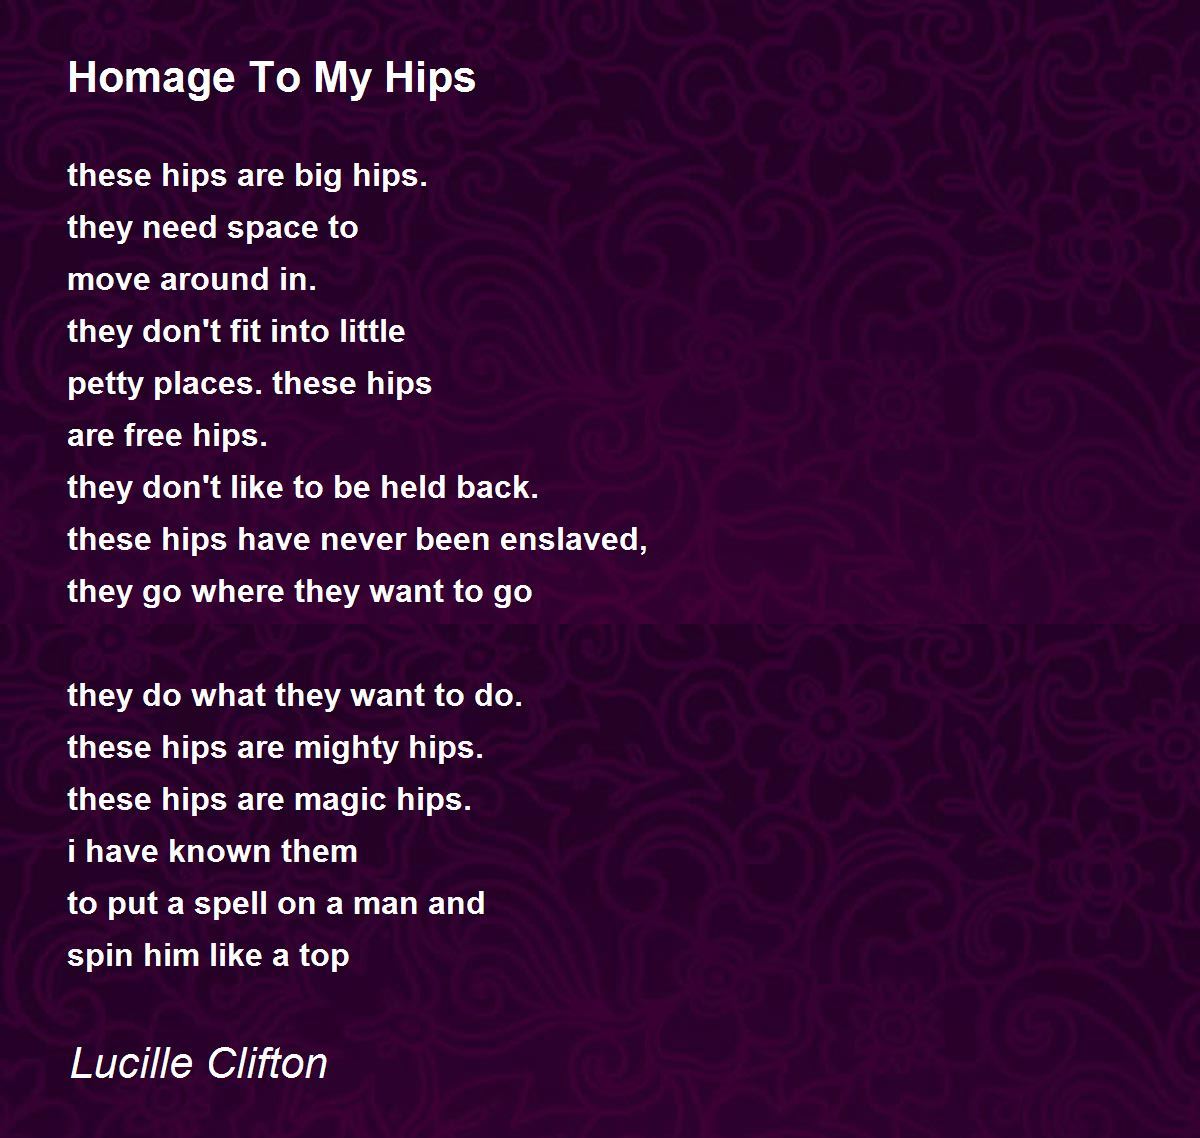 homage to my hips by lucille clifton